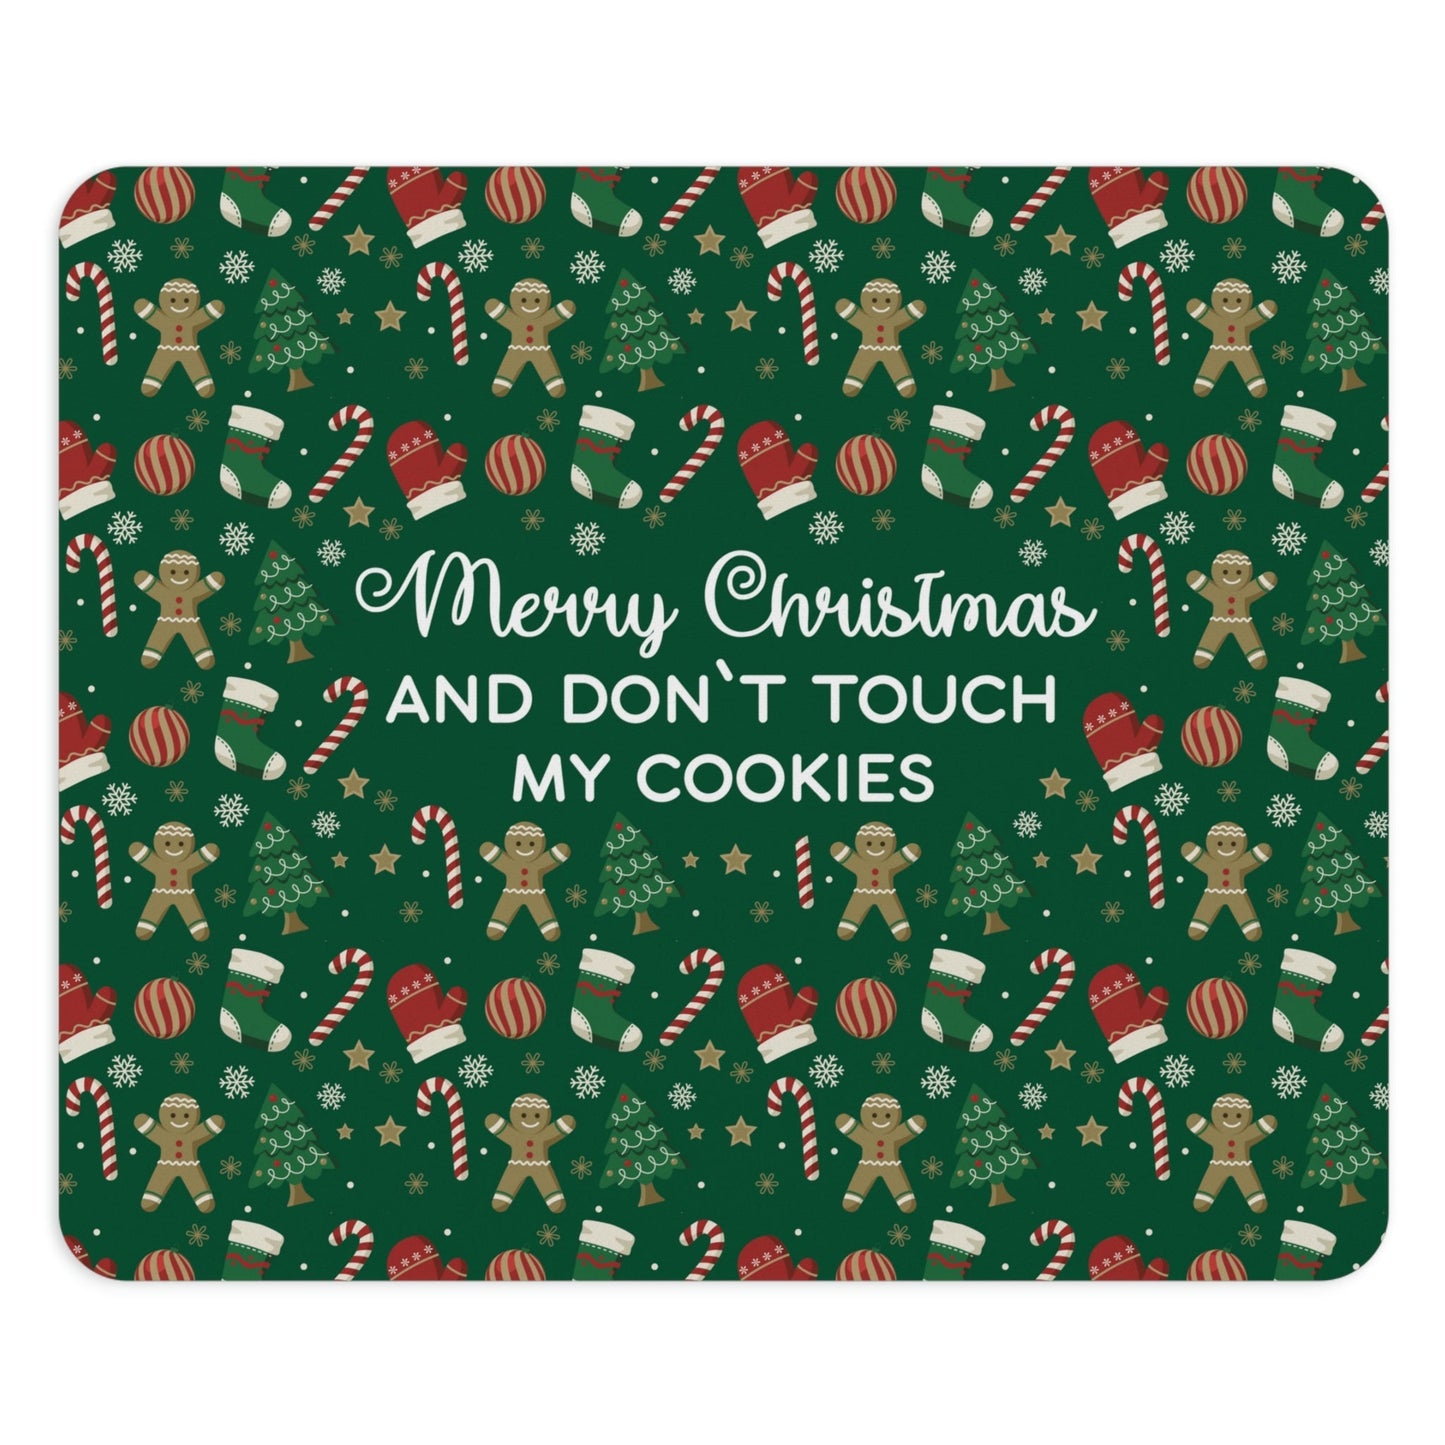 Merry Christmas and Don't Touch my Cookies Quotes Ergonomic Non-slip Creative Design Mouse Pad Ichaku [Perfect Gifts Selection]